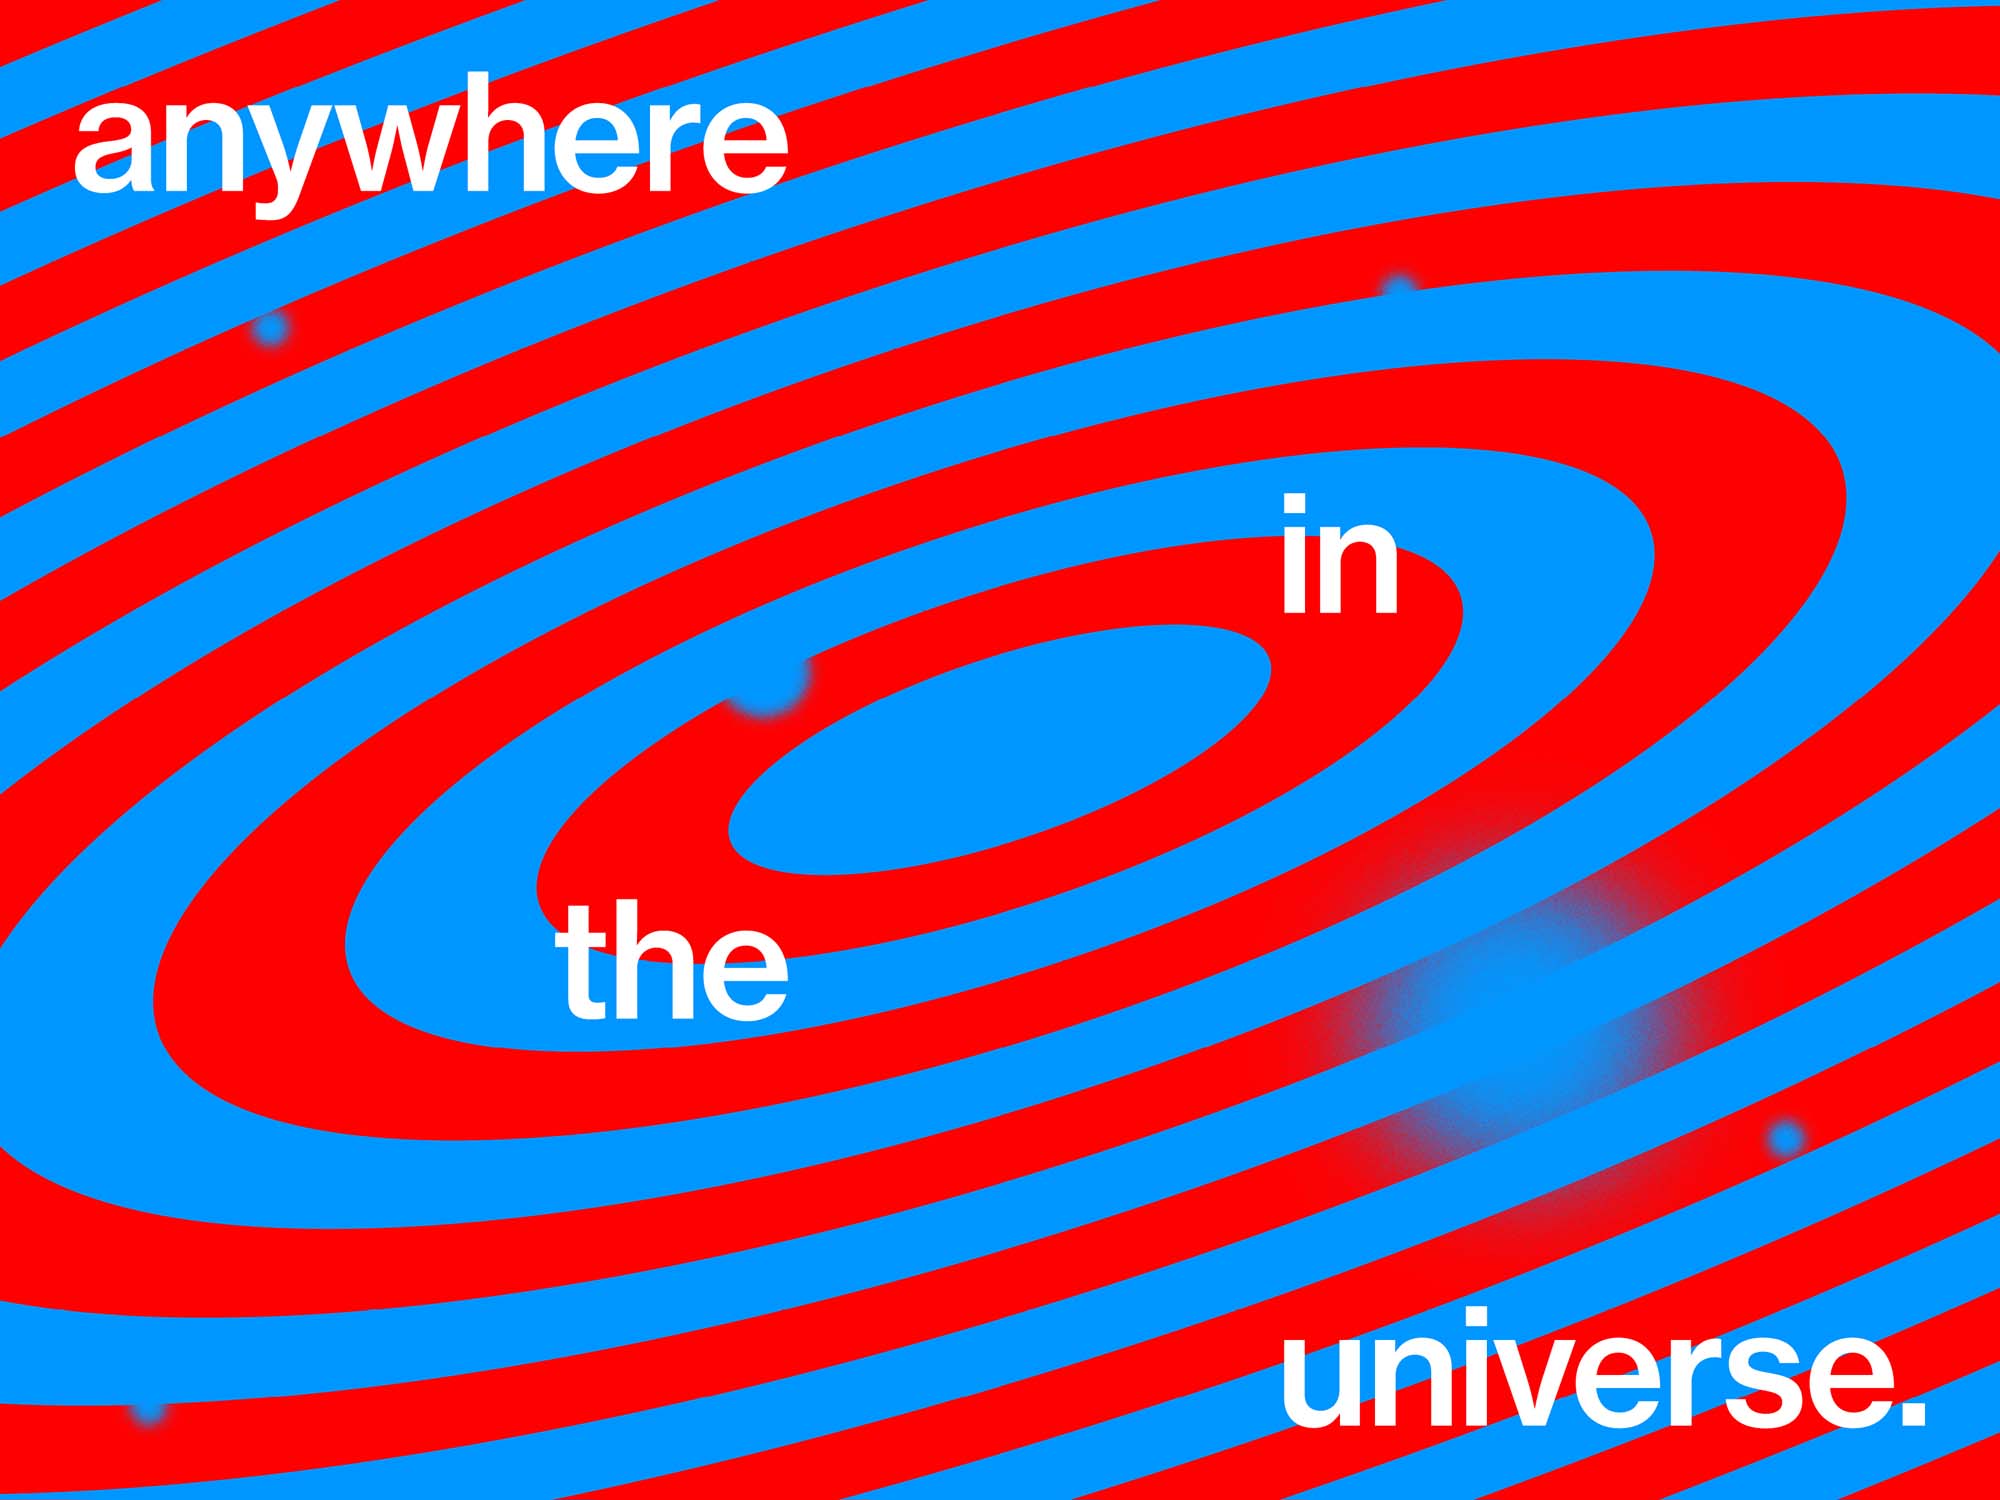 a graphic depiction of our universe with red and blue rings punctuated by blue planets. a text in white is overlaid and reads Anywhere in the Universe